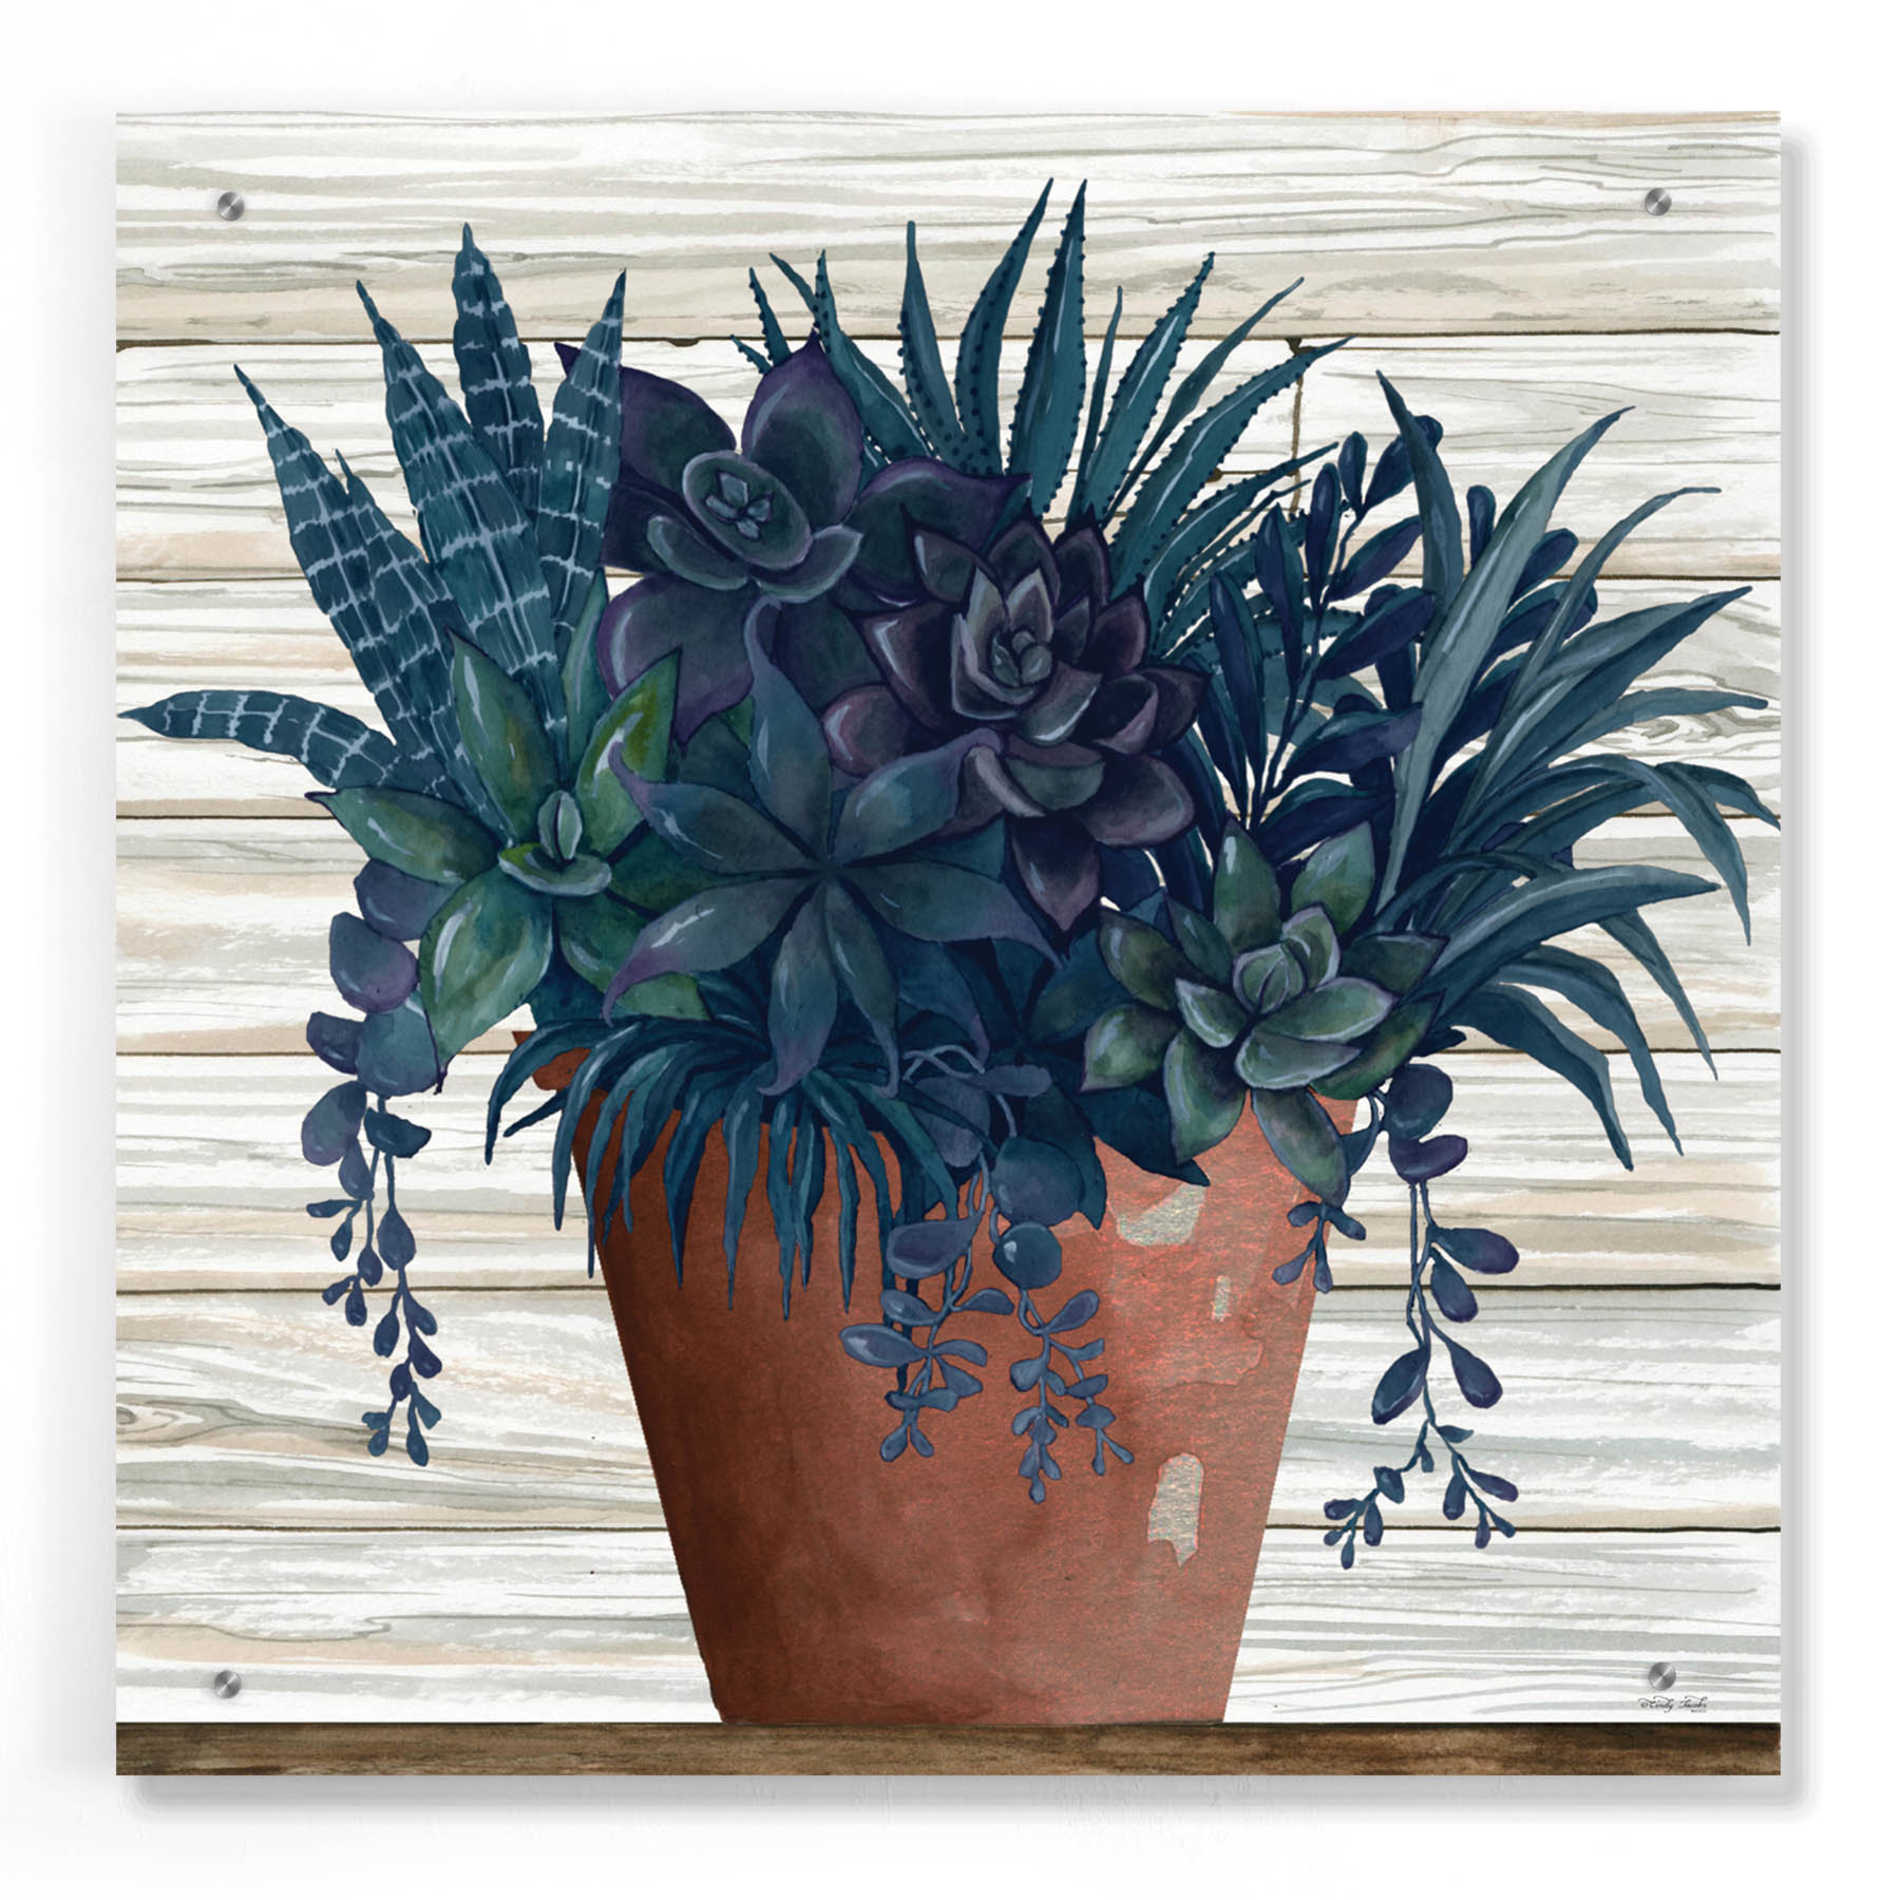 Epic Art 'Remarkable Succulents II' by Cindy Jacobs, Acrylic Glass Wall Art,24x24